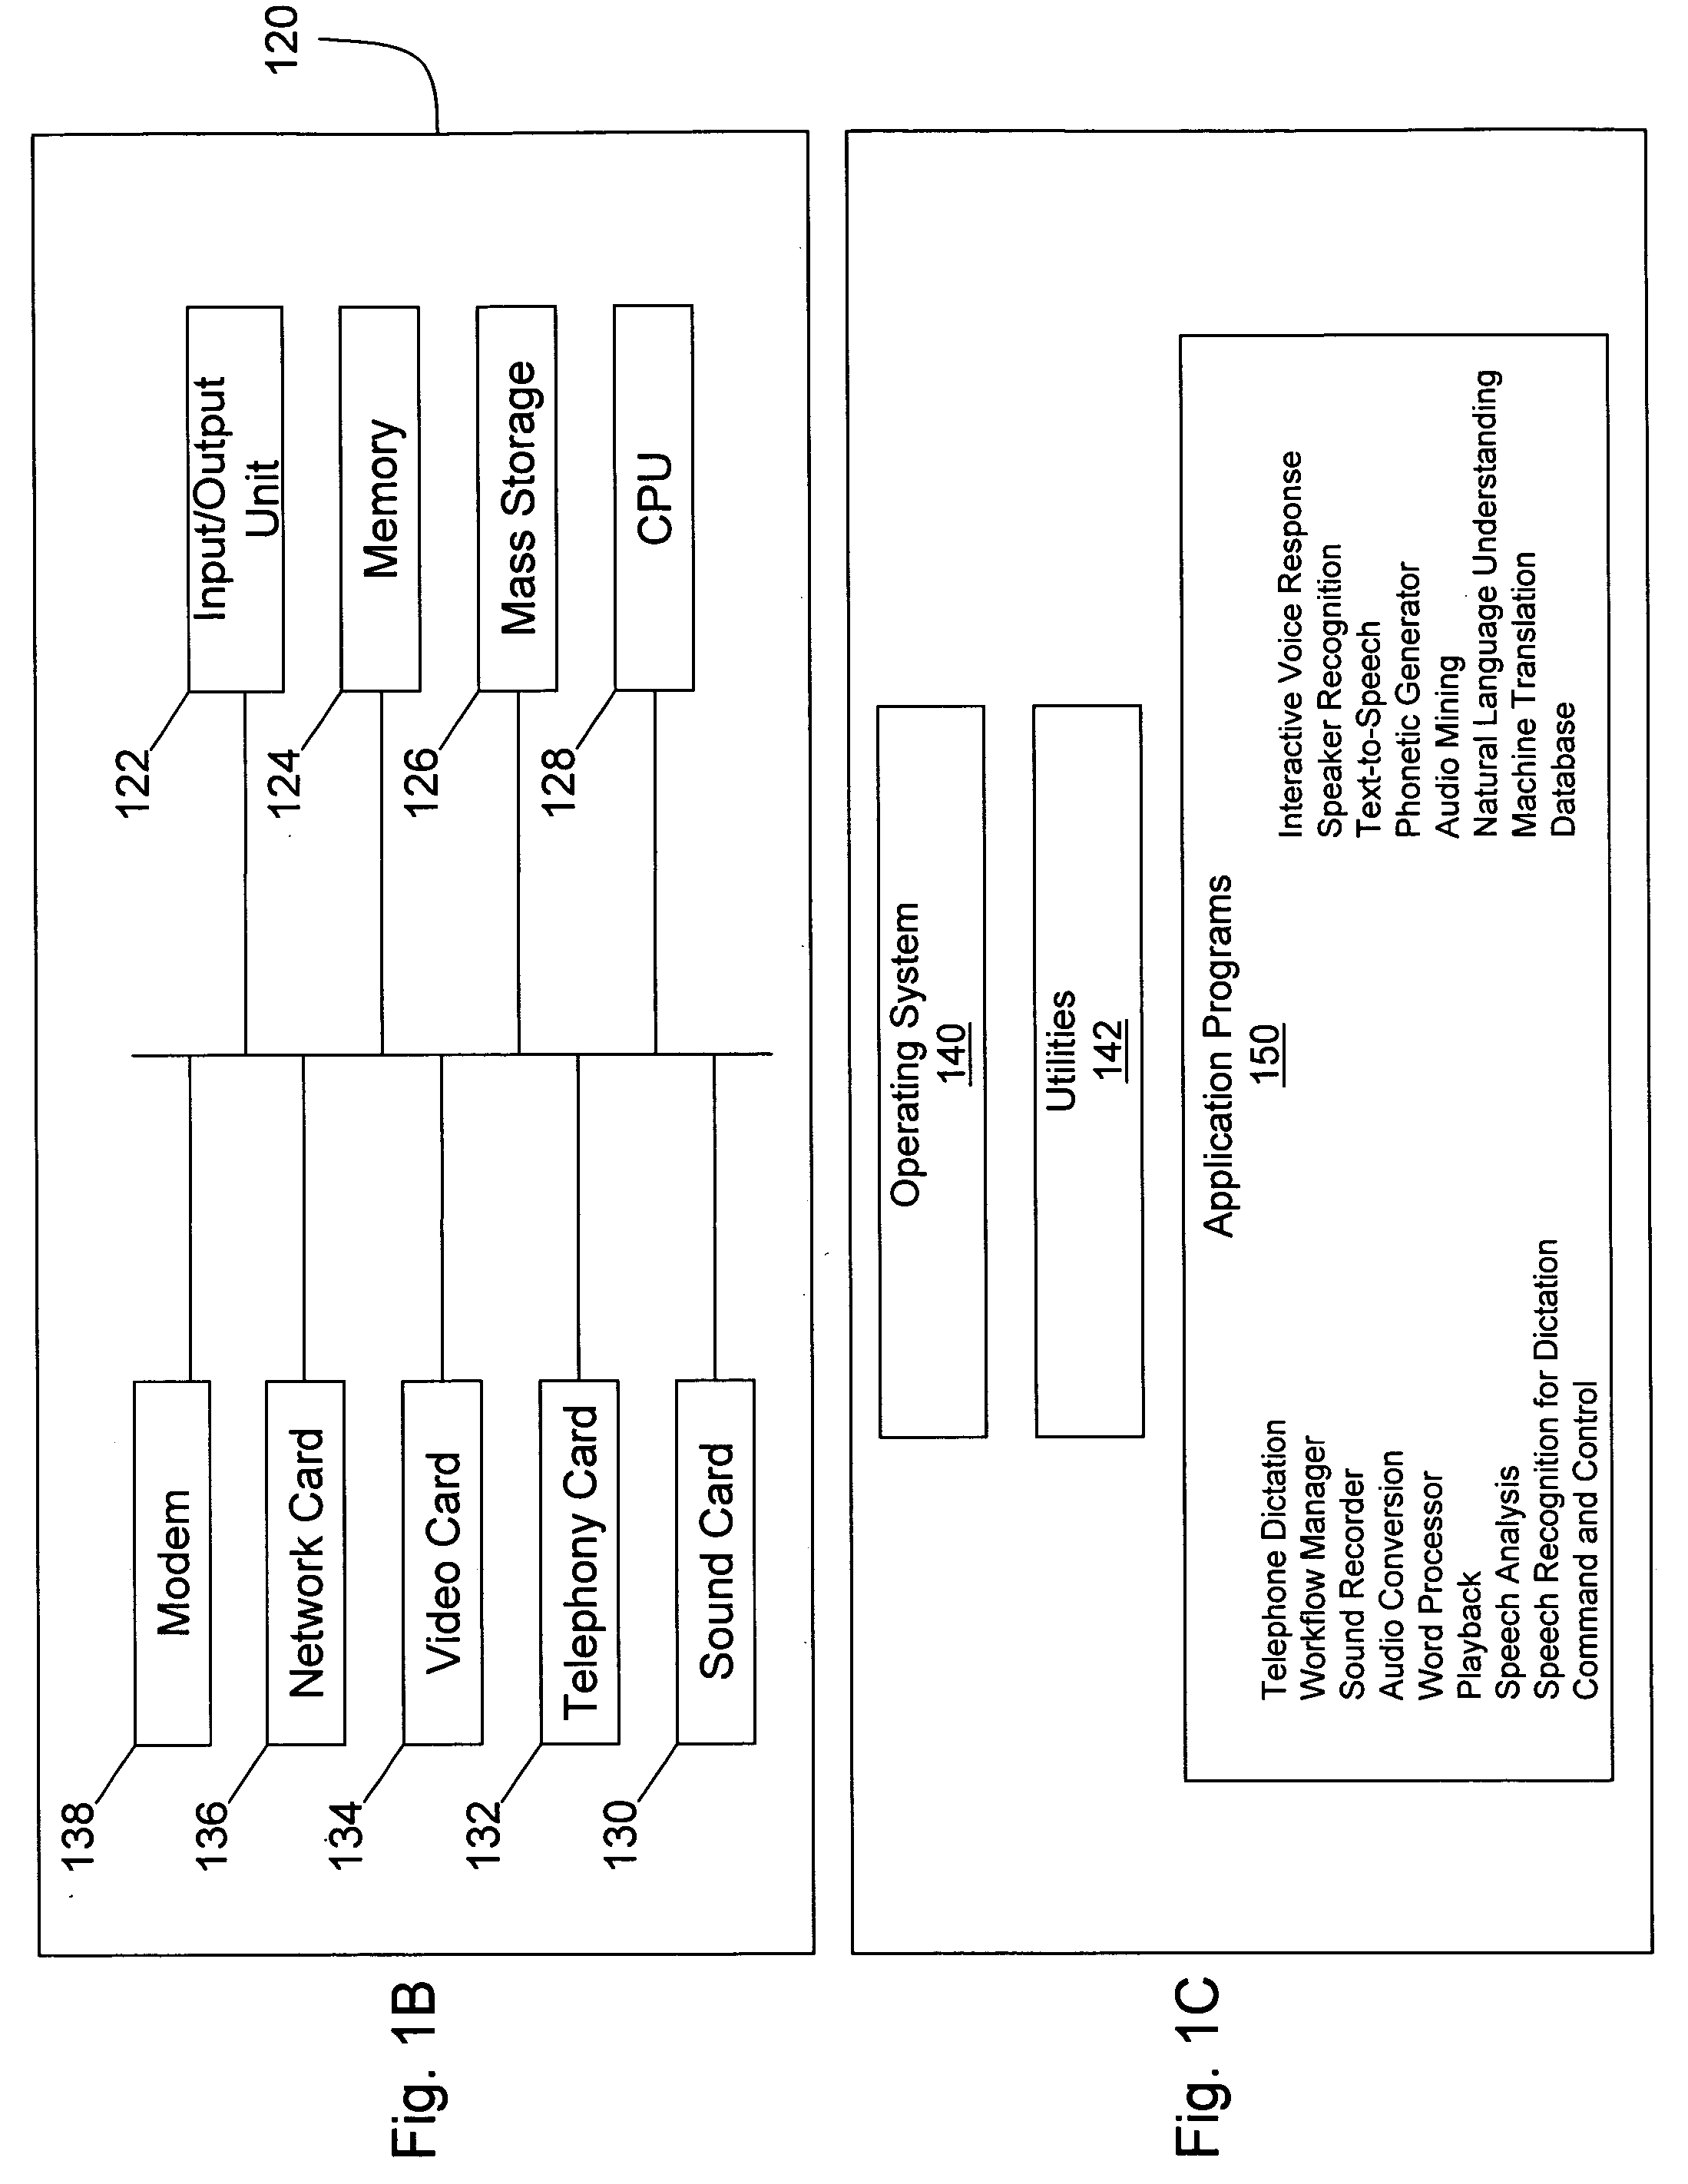 Synchronized pattern recognition source data processed by manual or automatic means for creation of shared speaker-dependent speech user profile